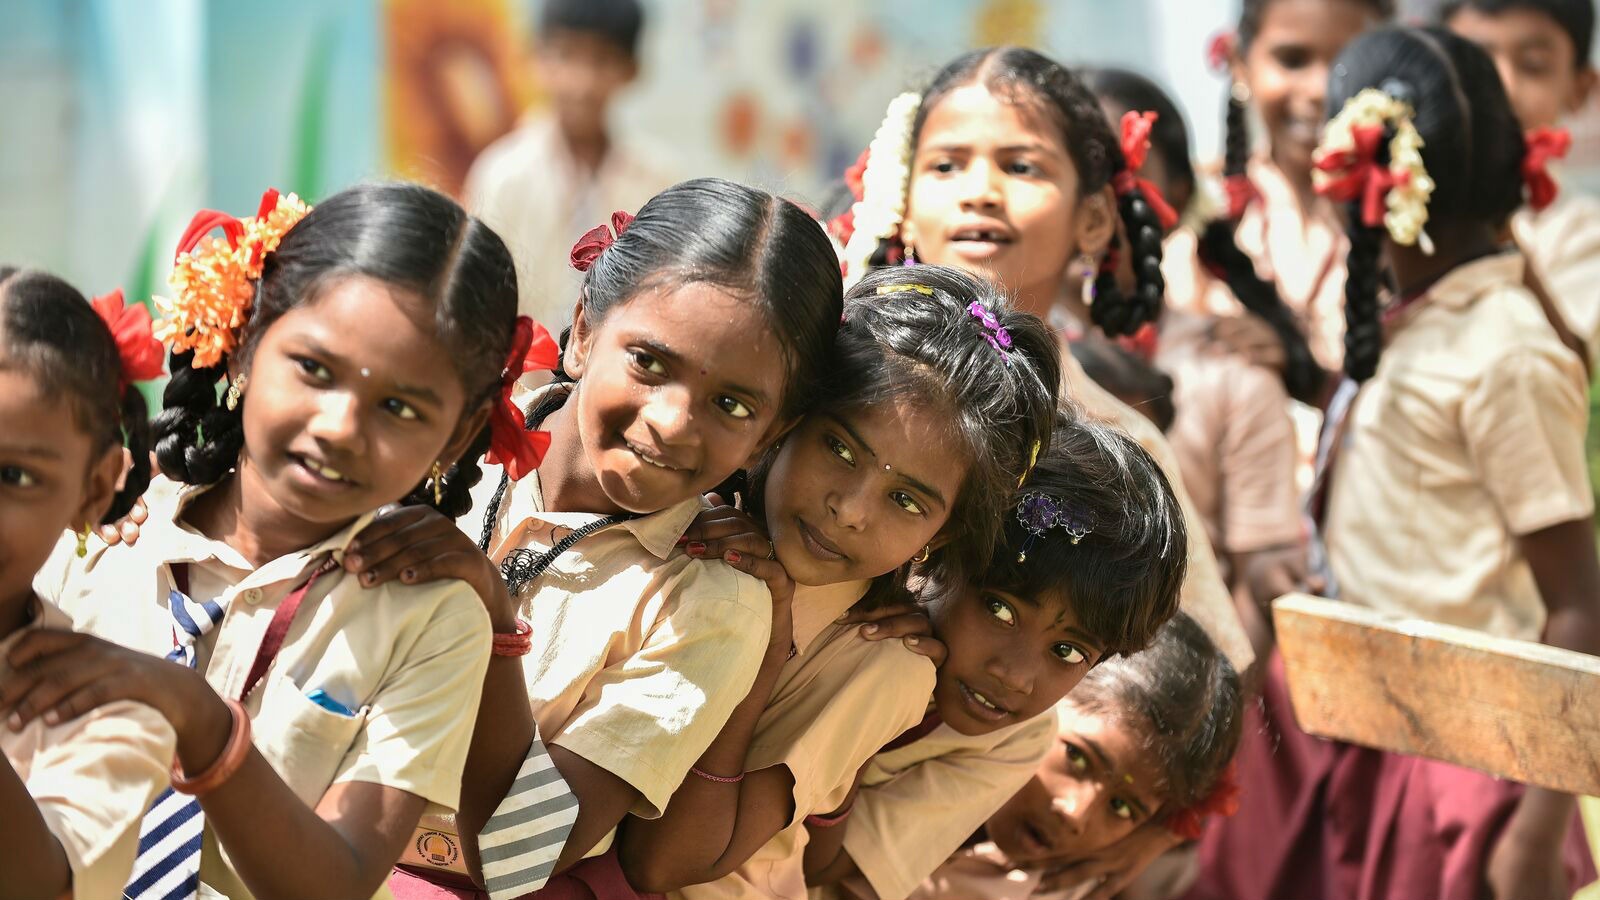 Children in India stand together in a line with smiles on their faces while wearing school uniforms